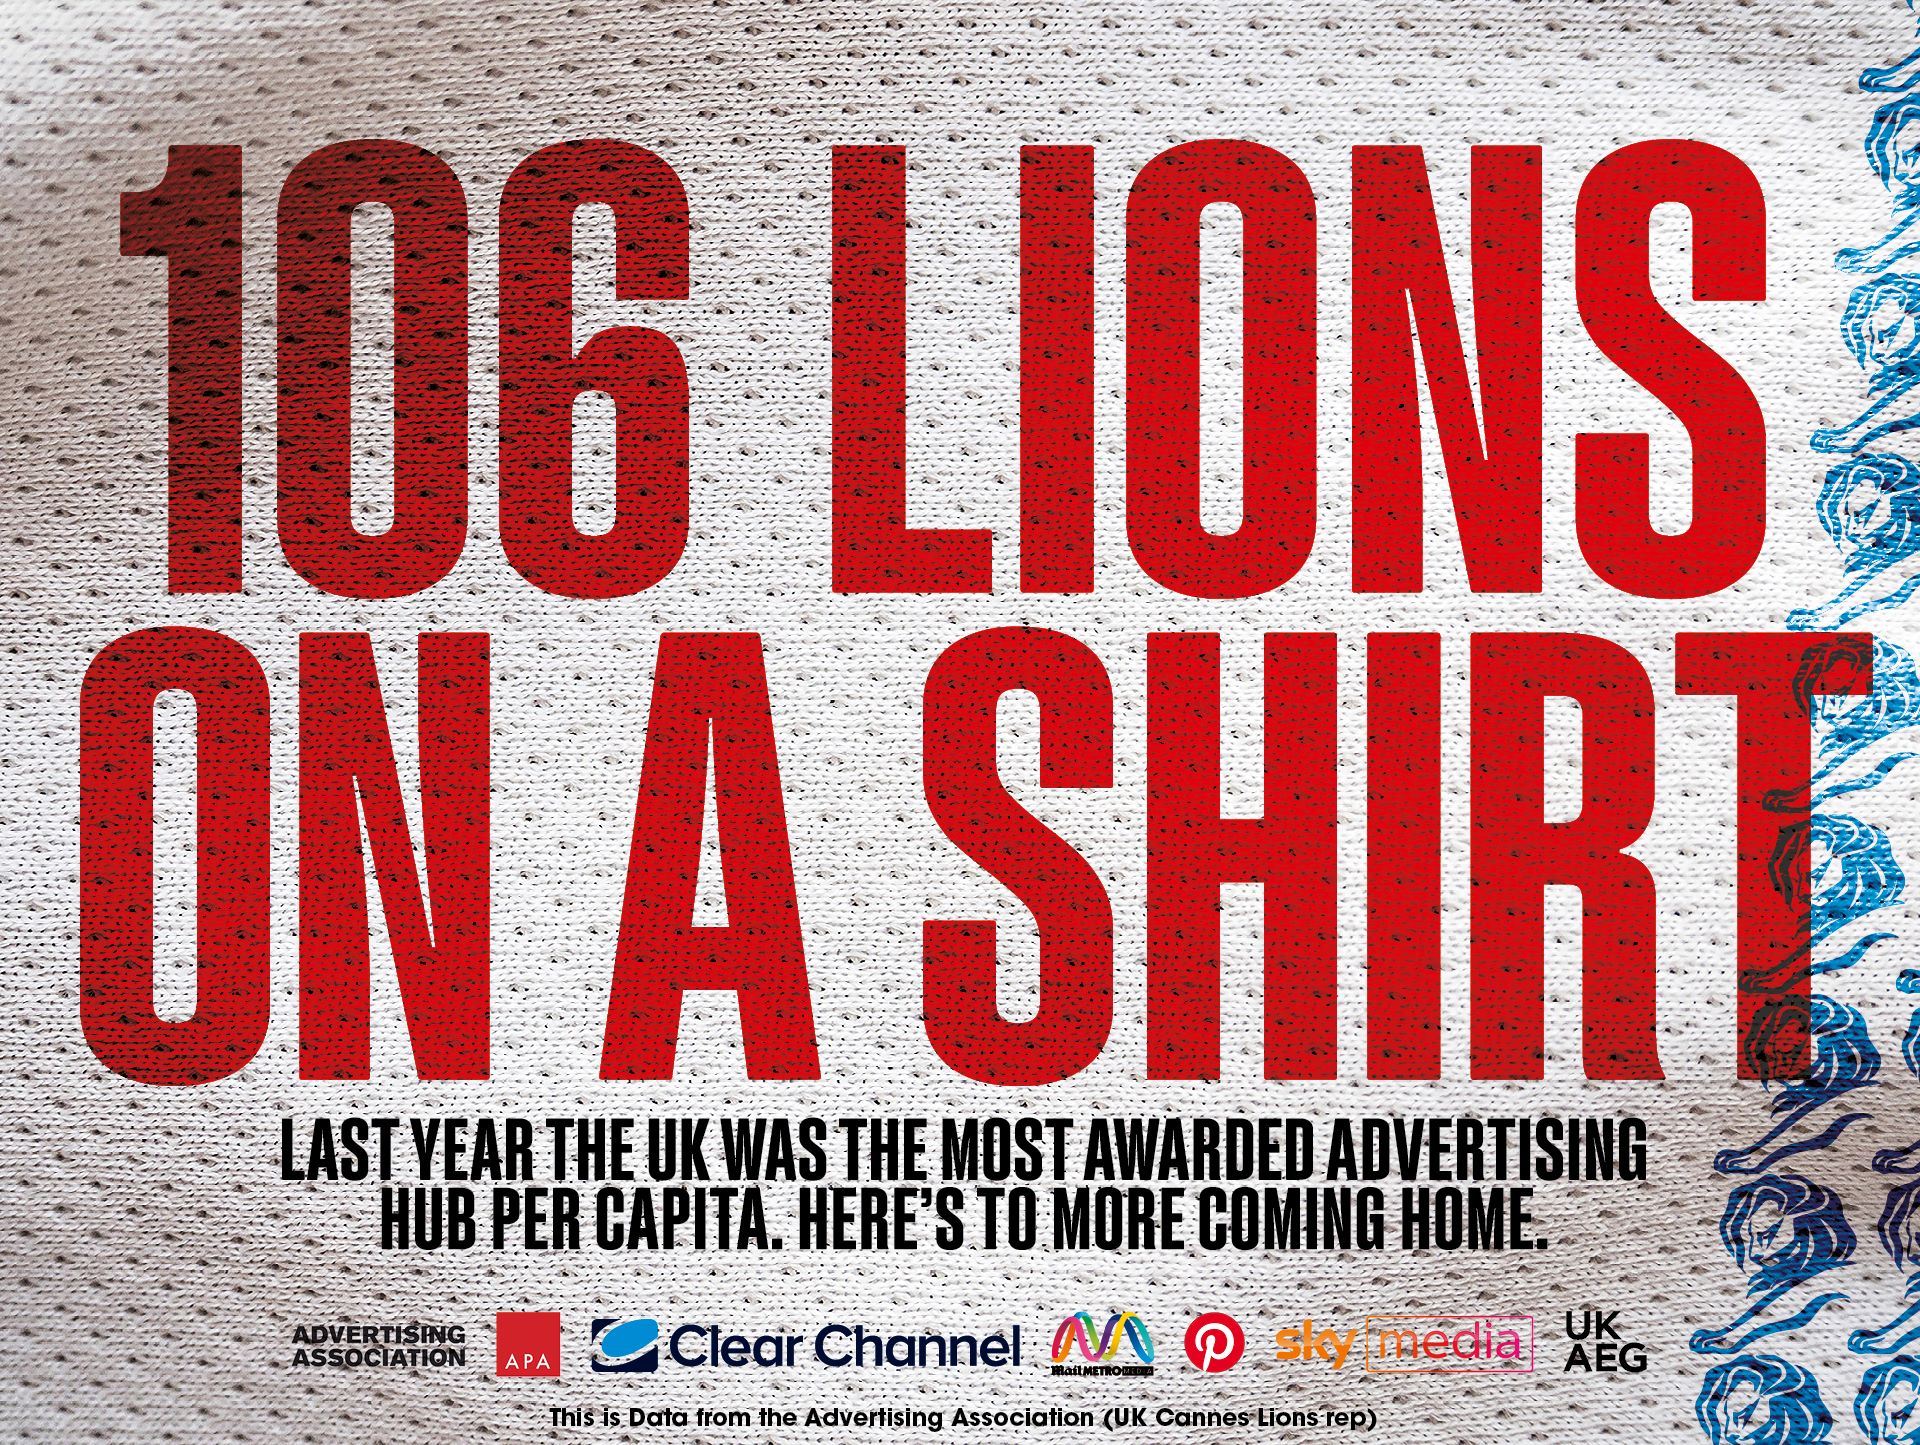 UKAEG partnered with VCCP to create a campaign at Cannes to celebrate the UK’s number of wins at Cannes Lions last year